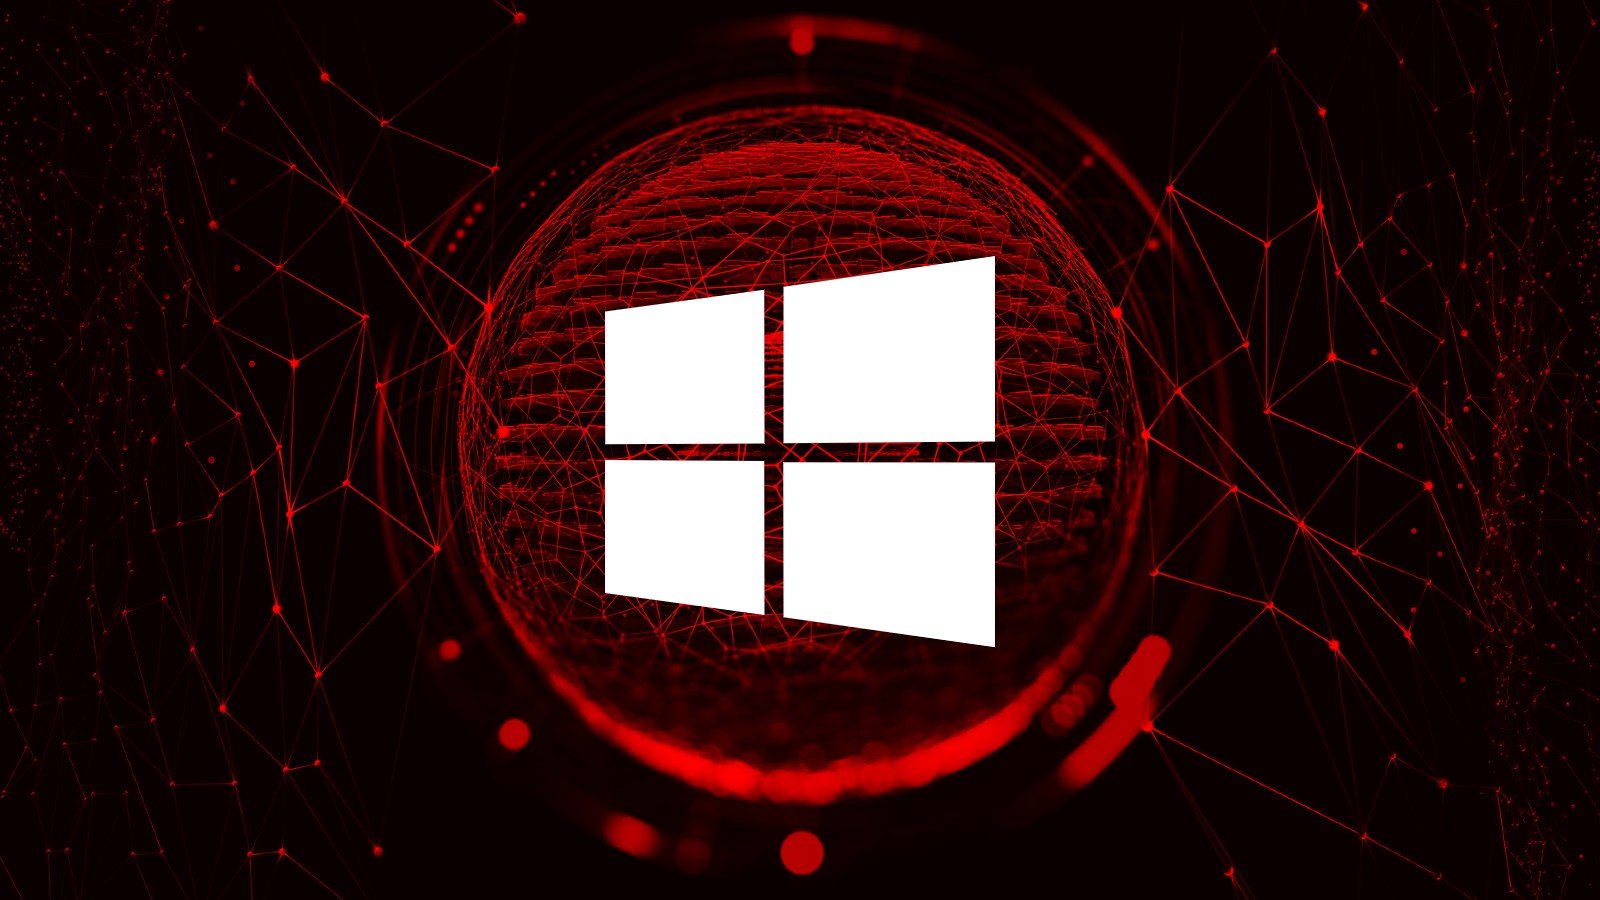 Microsoft pushes OOB safety updates for Home windows Snipping device flaw